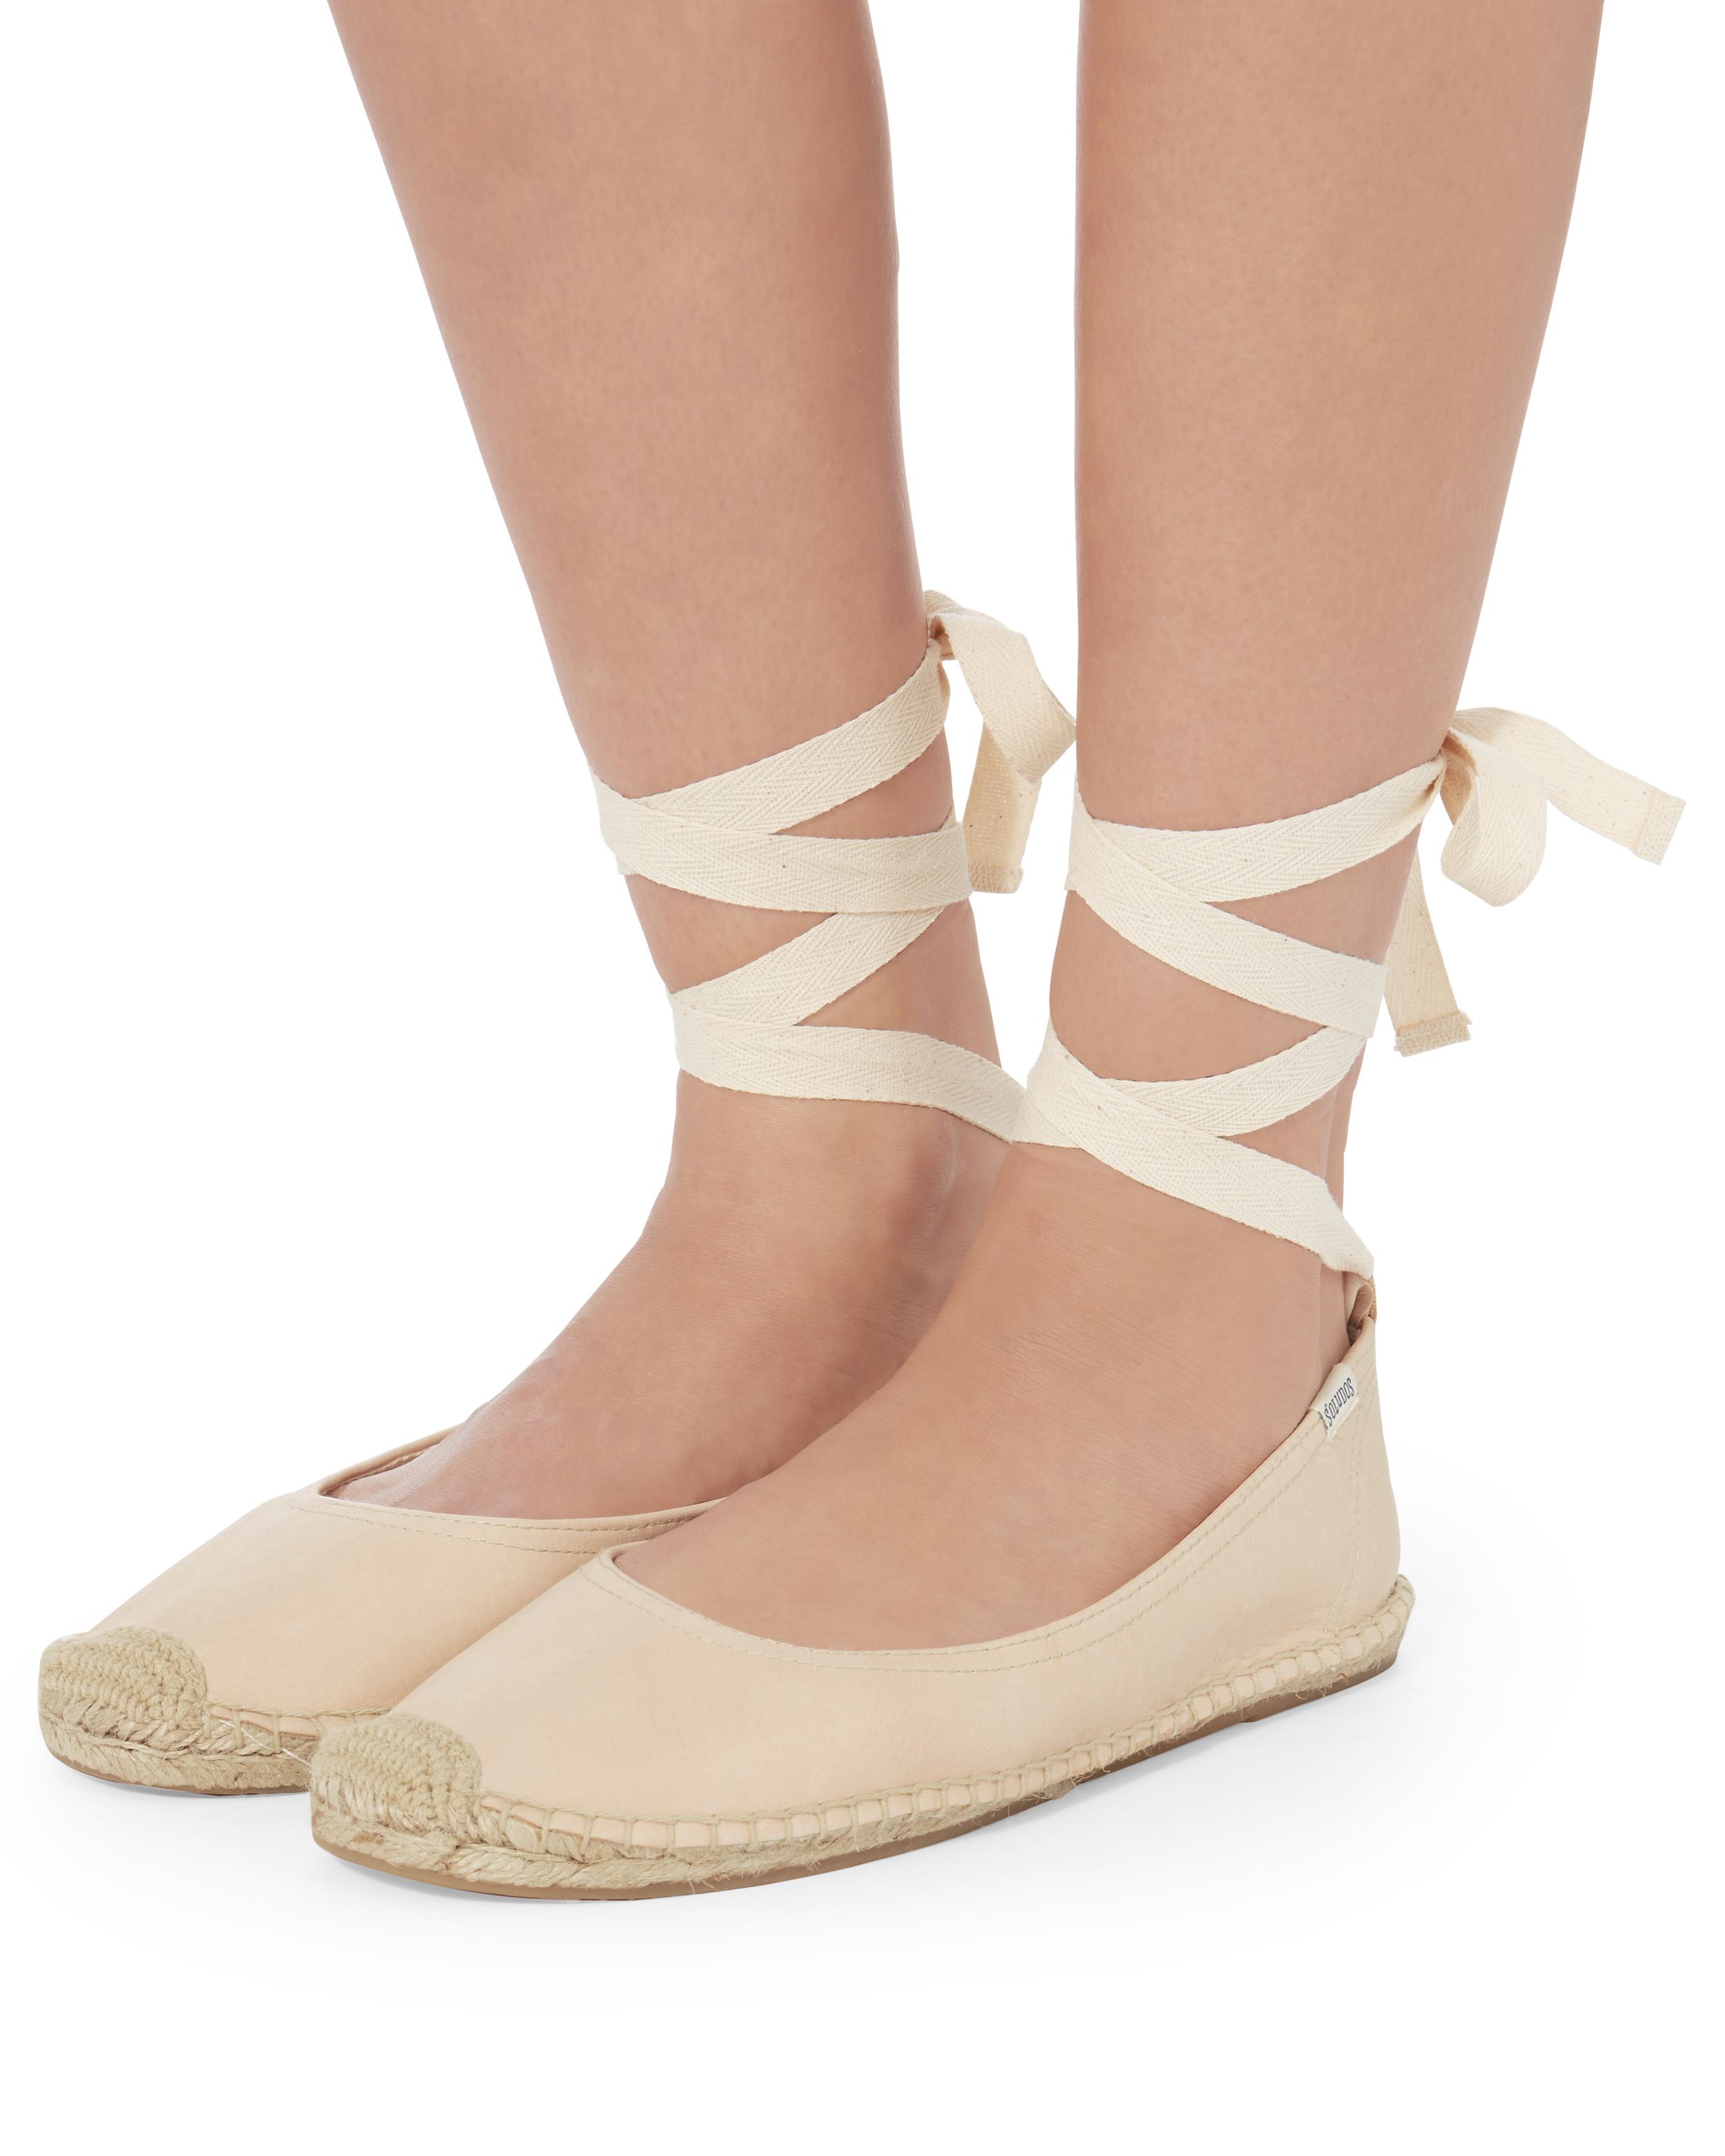 Soludos Ballet Tie Up Espadrille Flats in Nude (Natural) - Lyst